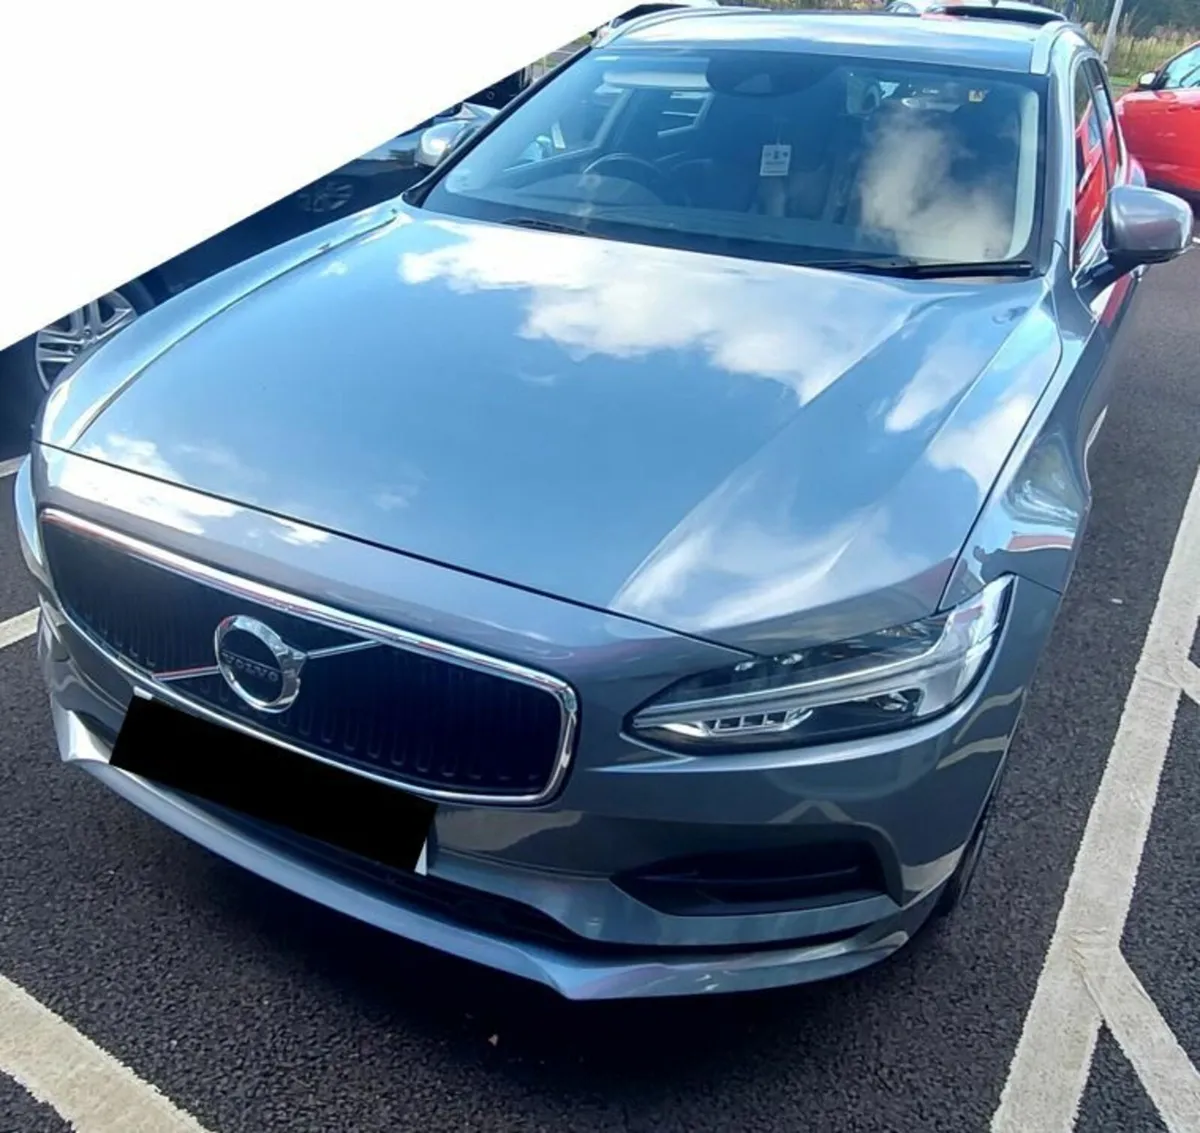 Volvo V90 (oct) 2018 ( MUST GO)  low milage.